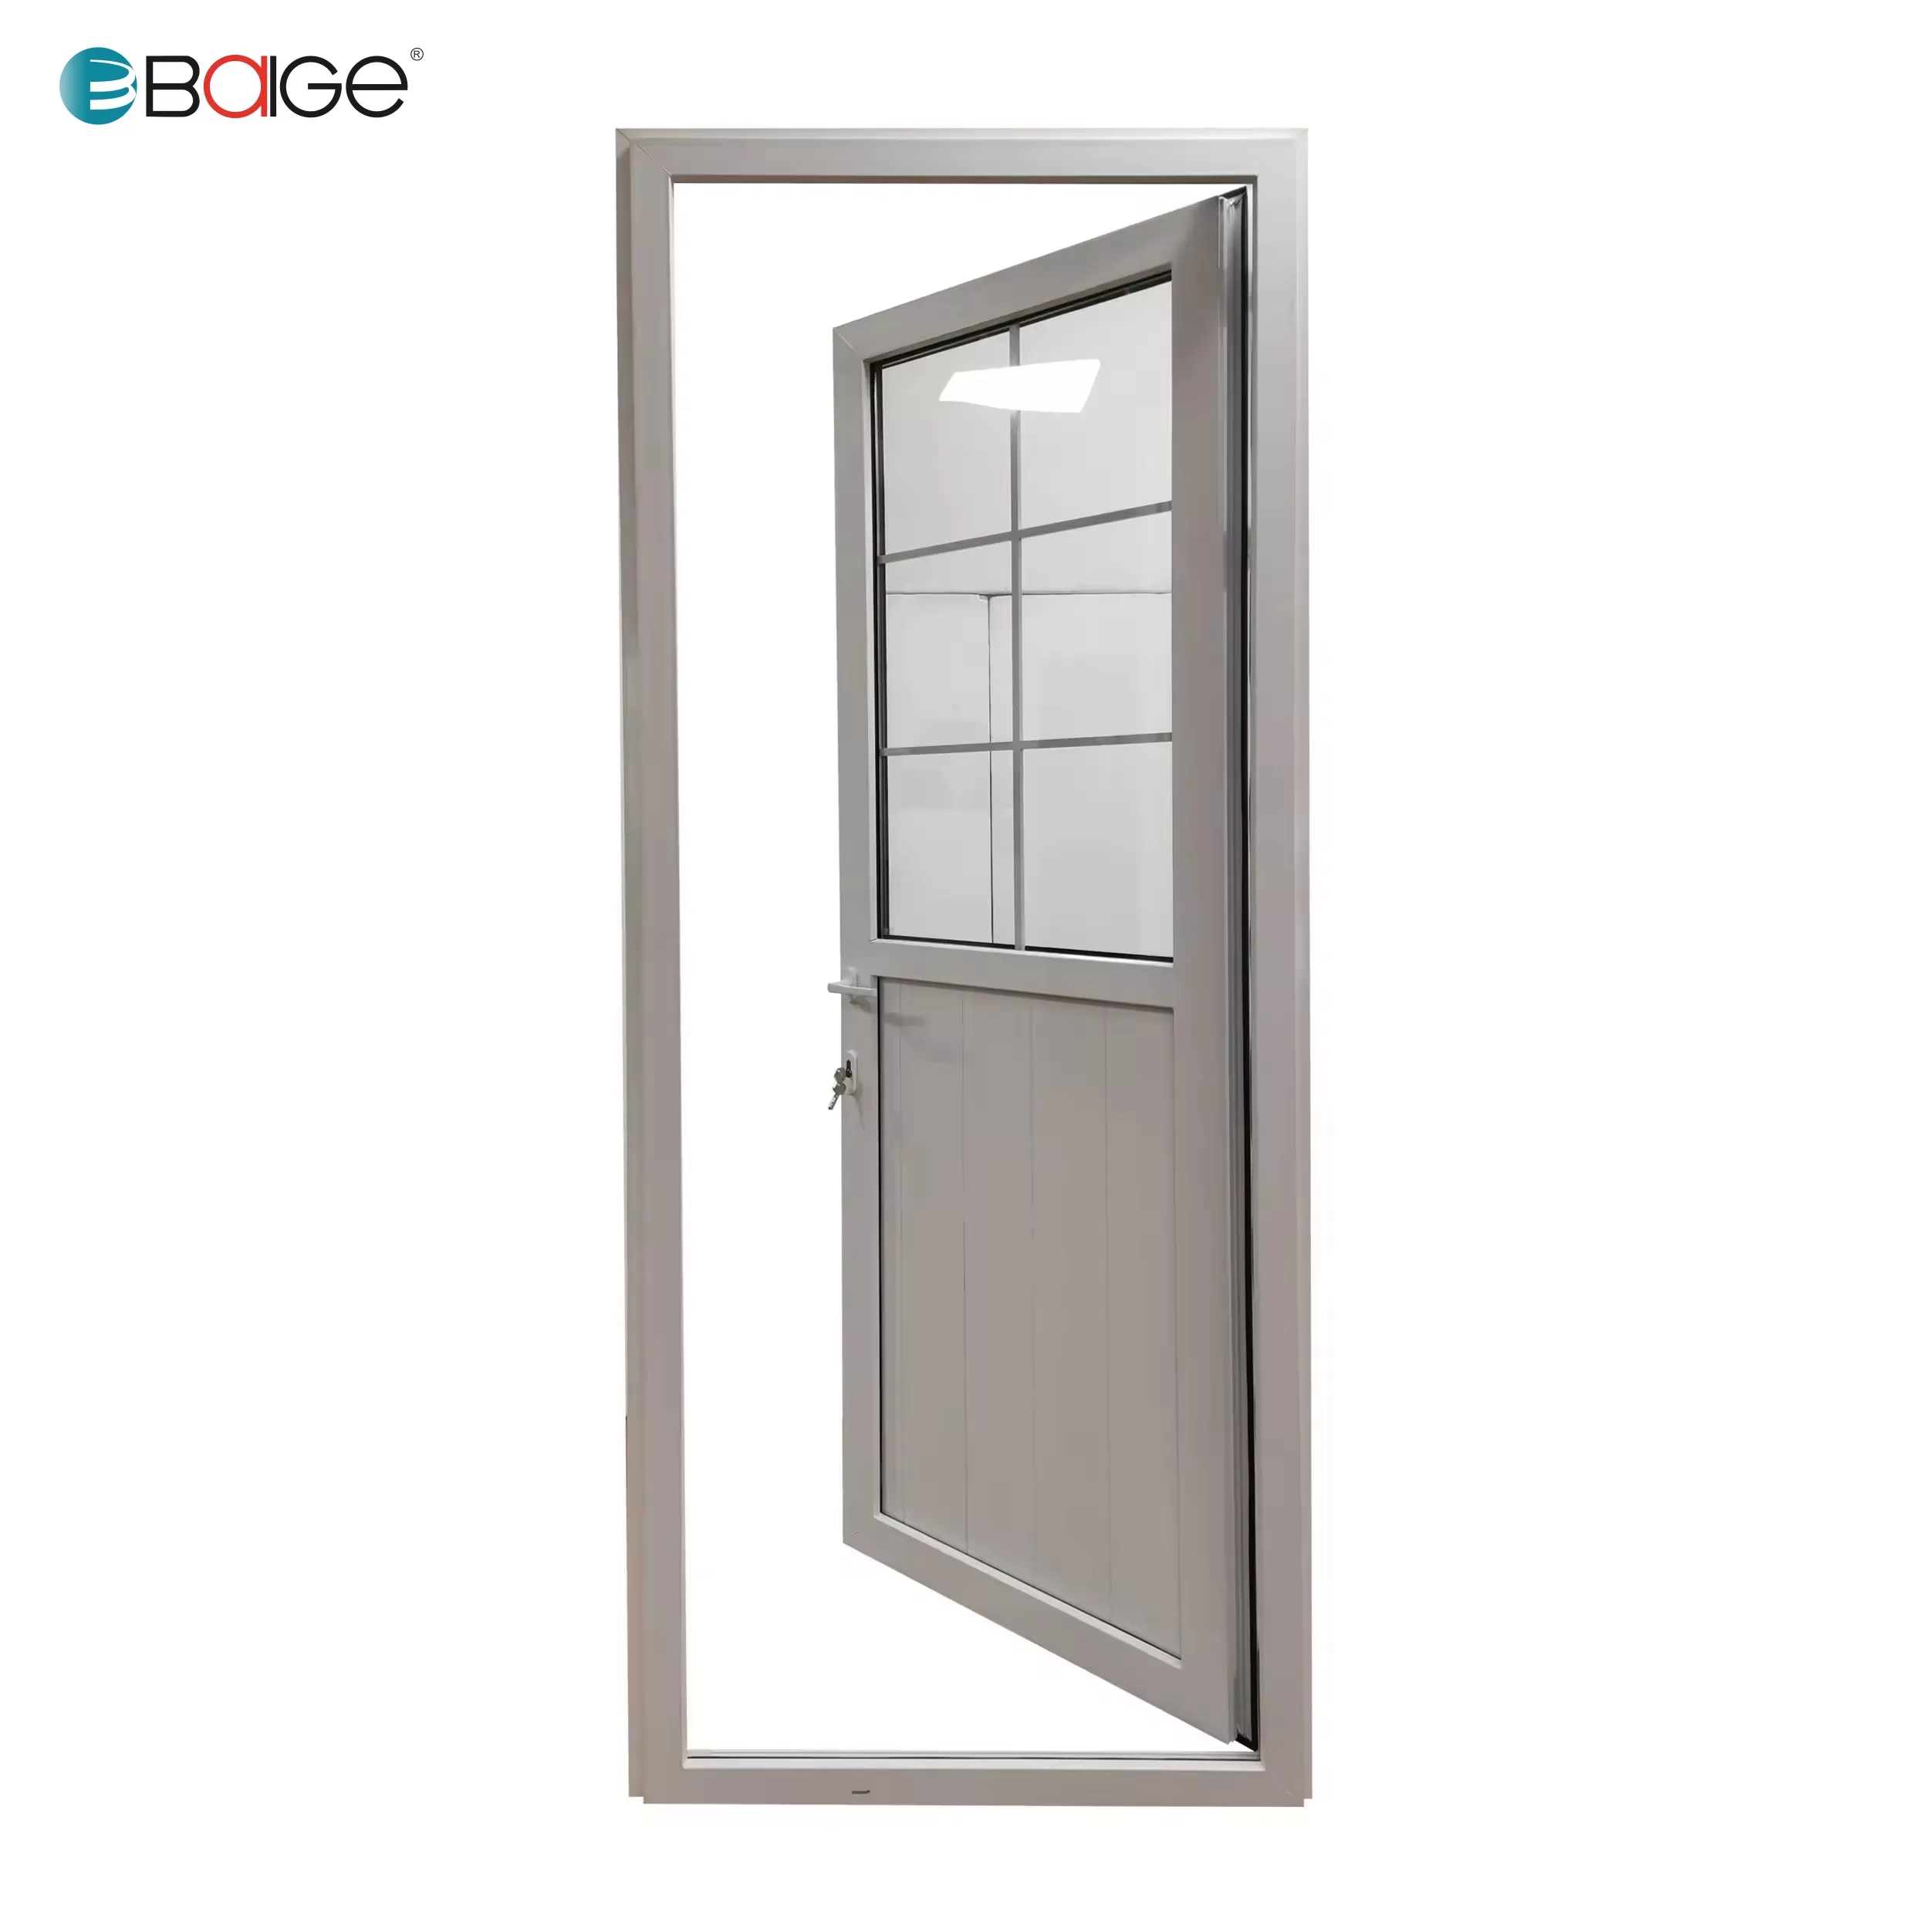 What are the advantages of choosing aluminum windows and doors over other materials?